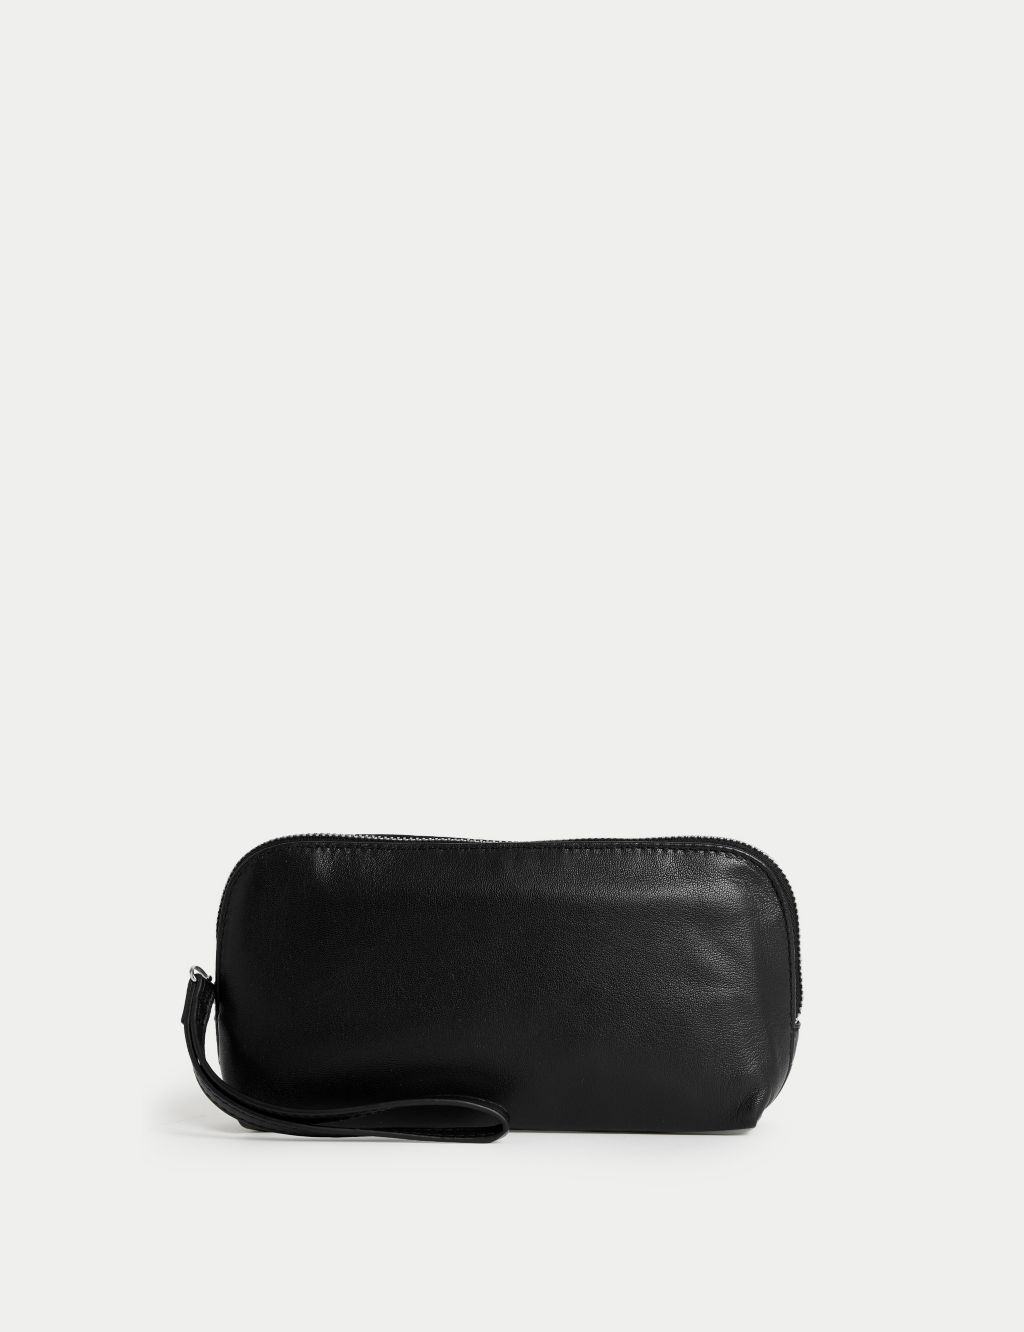 Leather Zip Around Pouch image 1